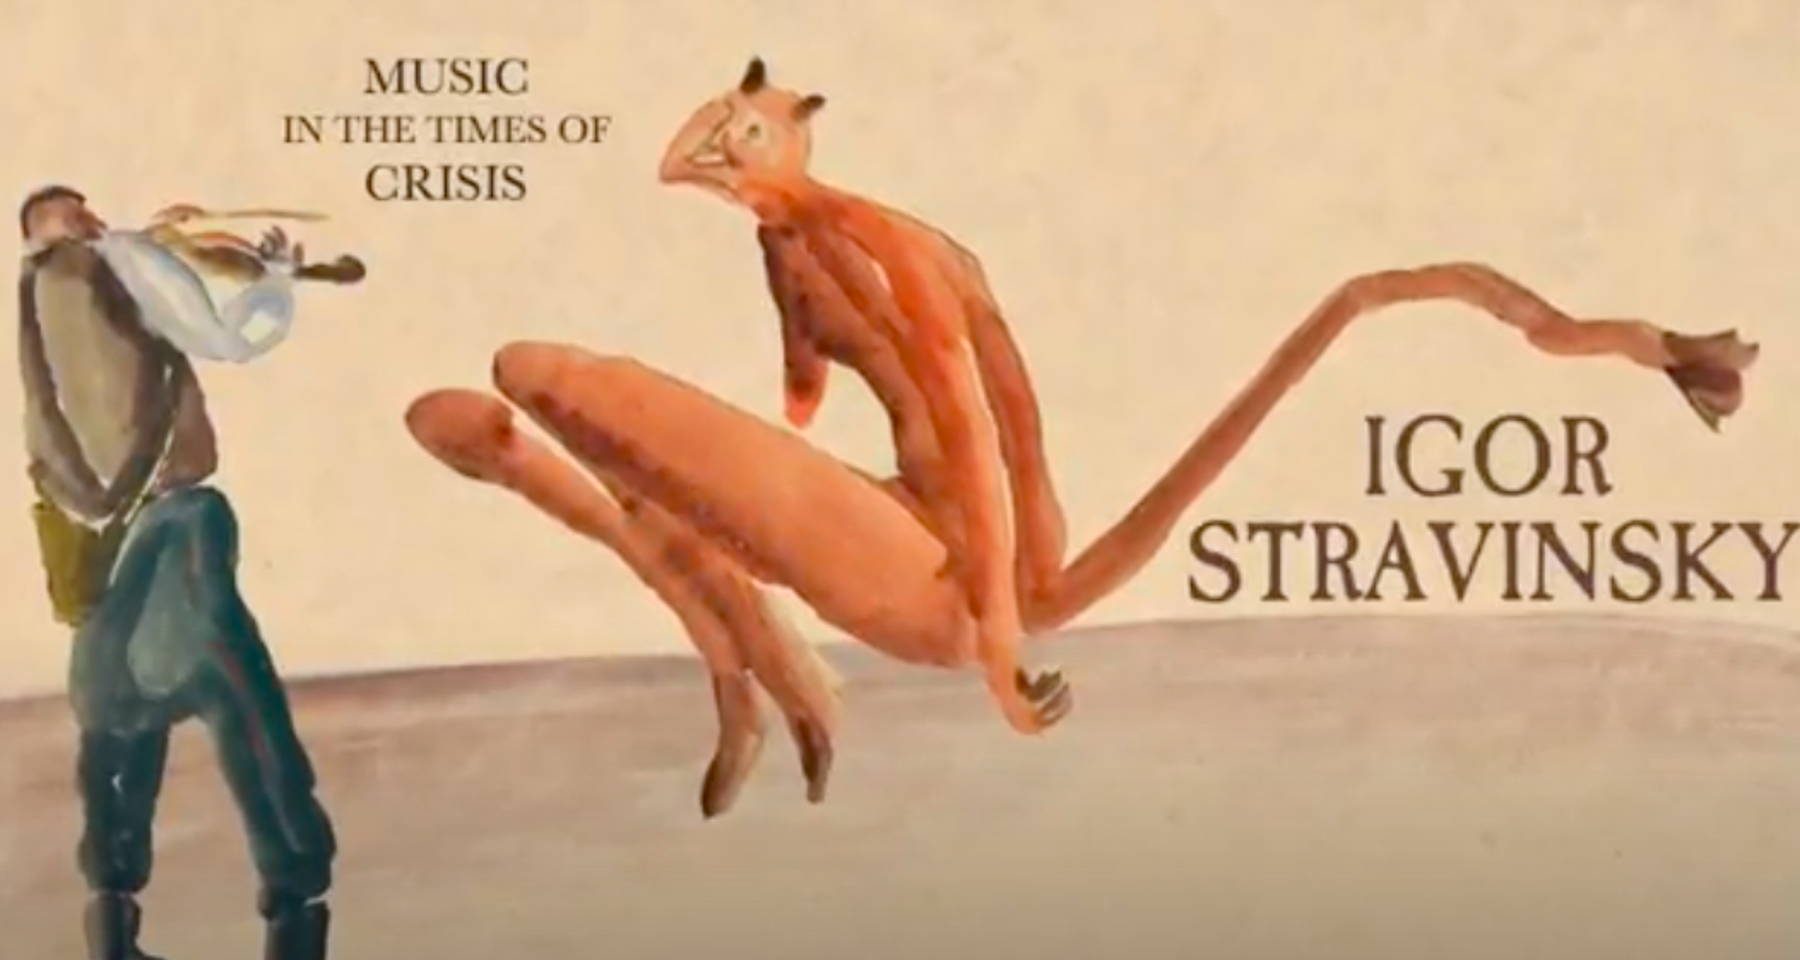 Music in the Times of Crisis: A Solider's Tale by Igor Stravinsky 